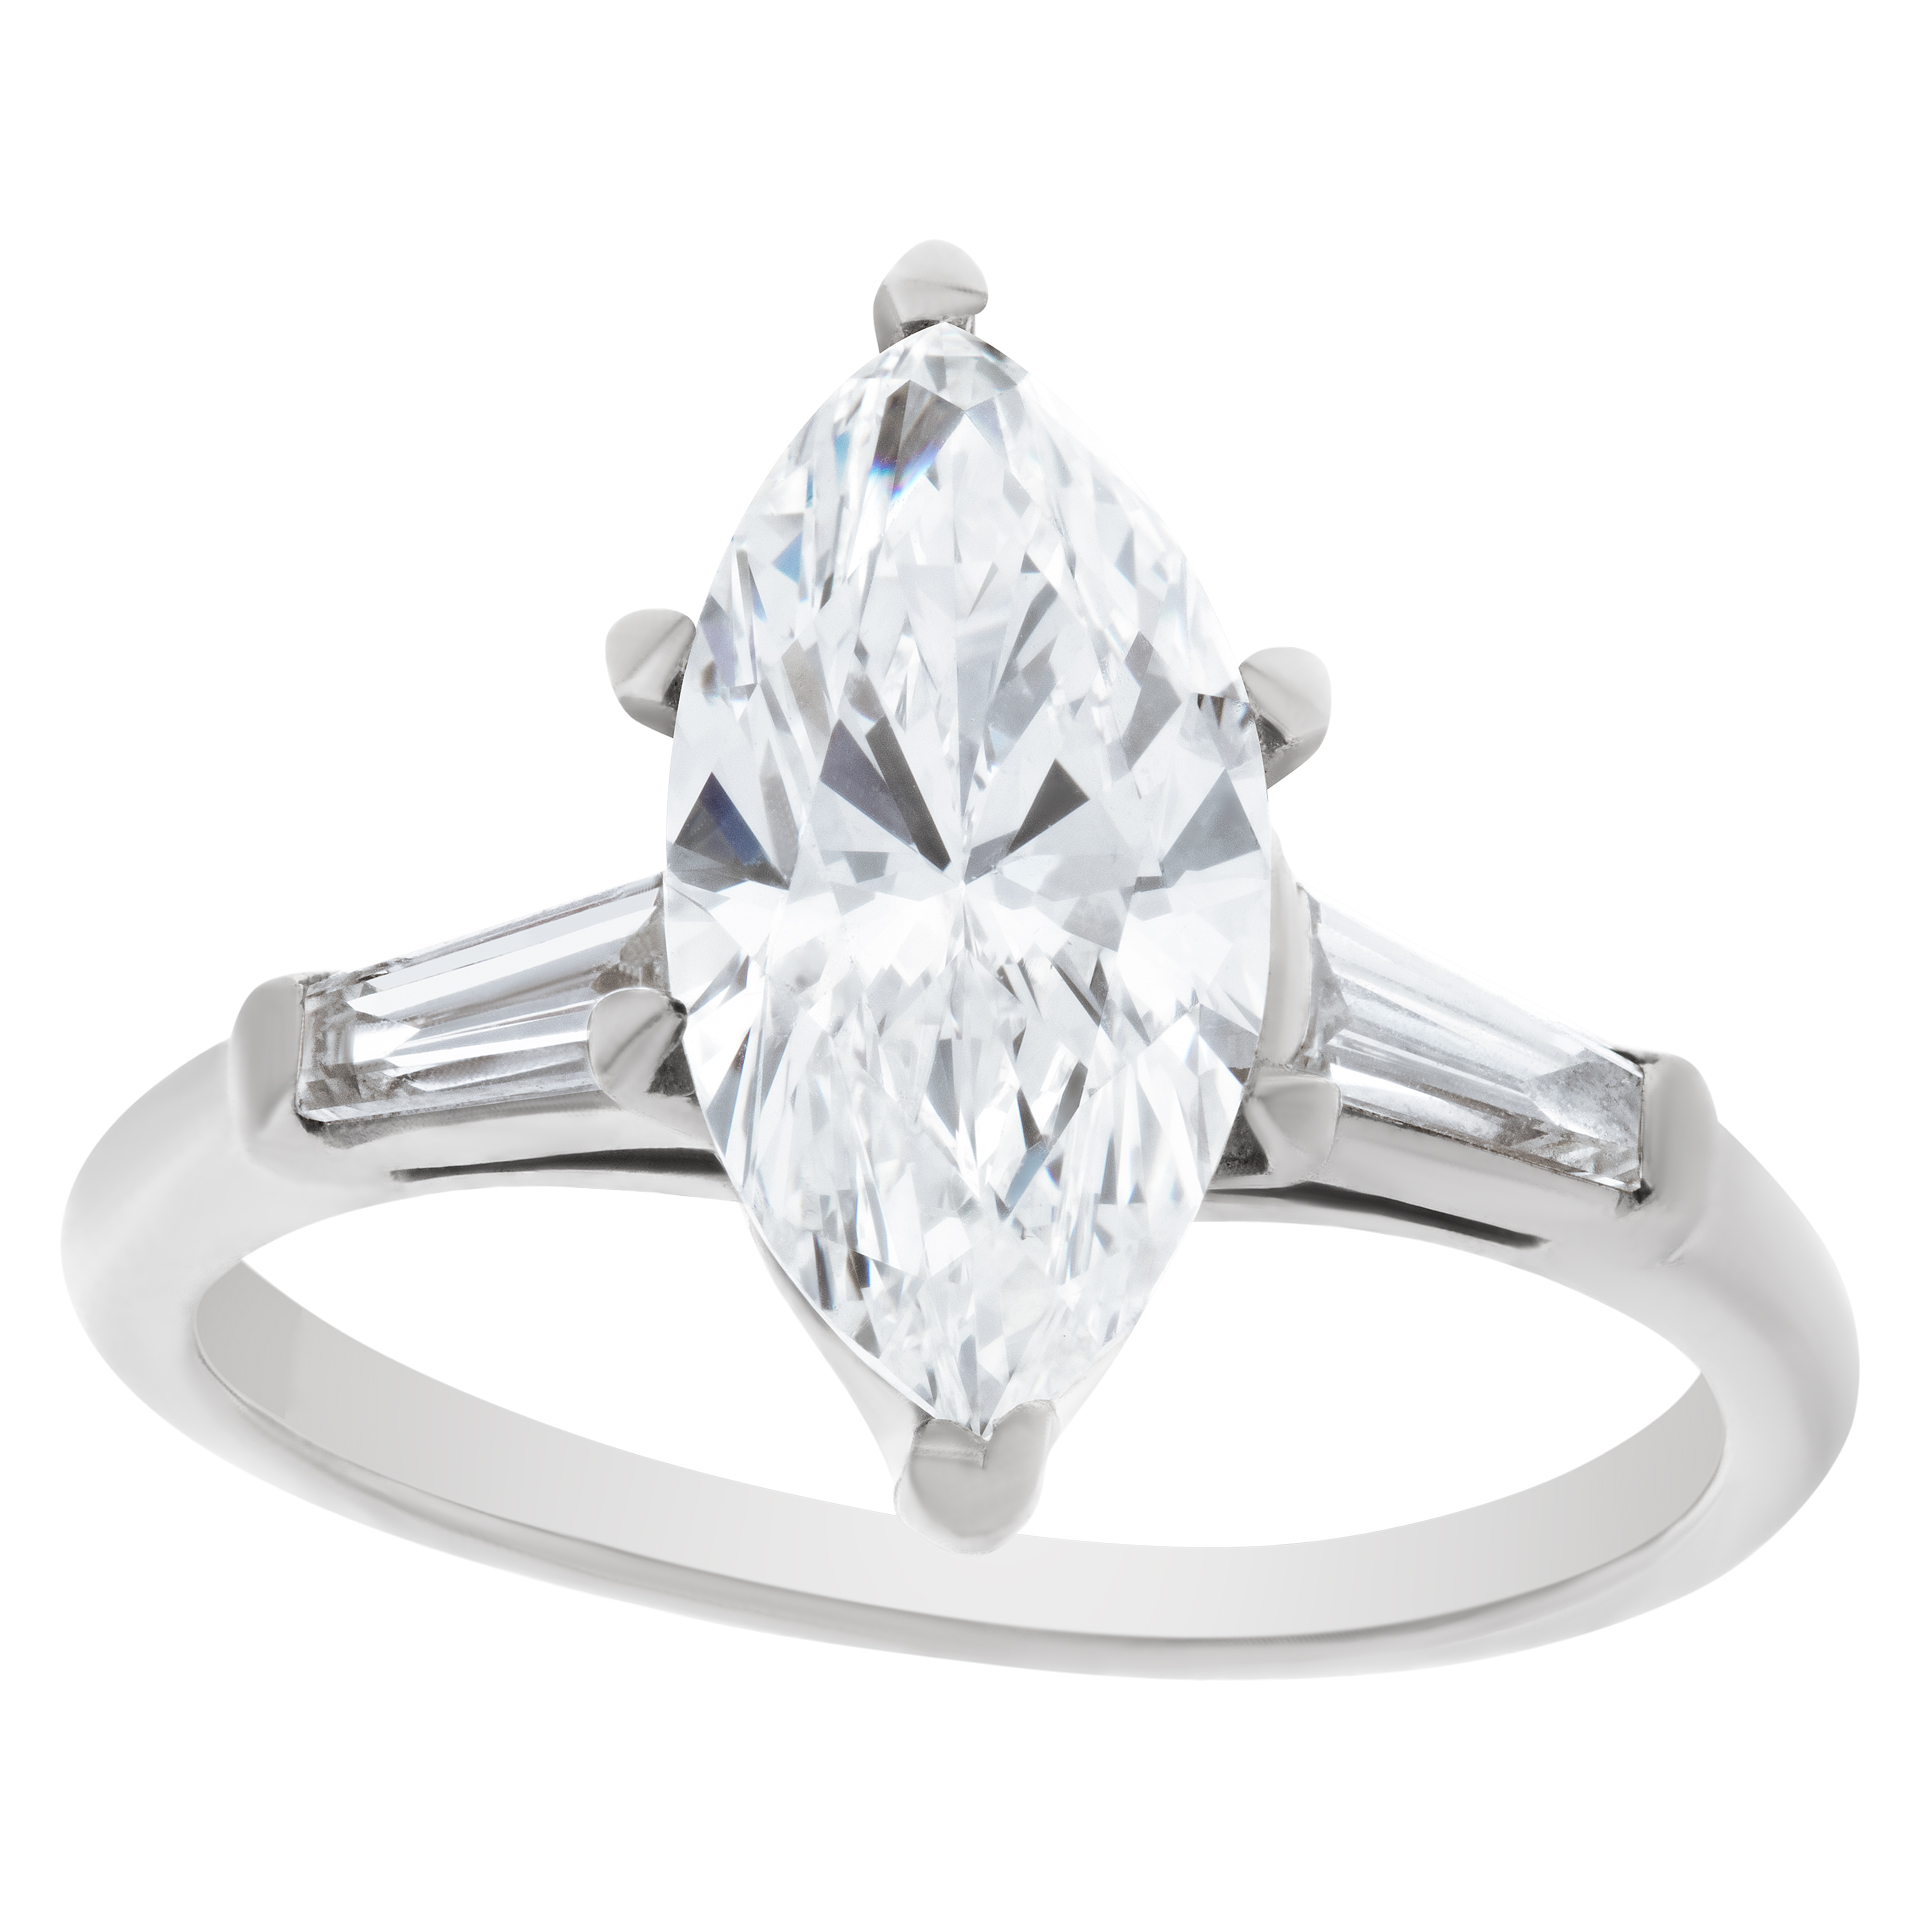 GIA certified marquise brilliant cut diamond  1.75 carat ( I color, VS1 clarity) ring set in the sample setting